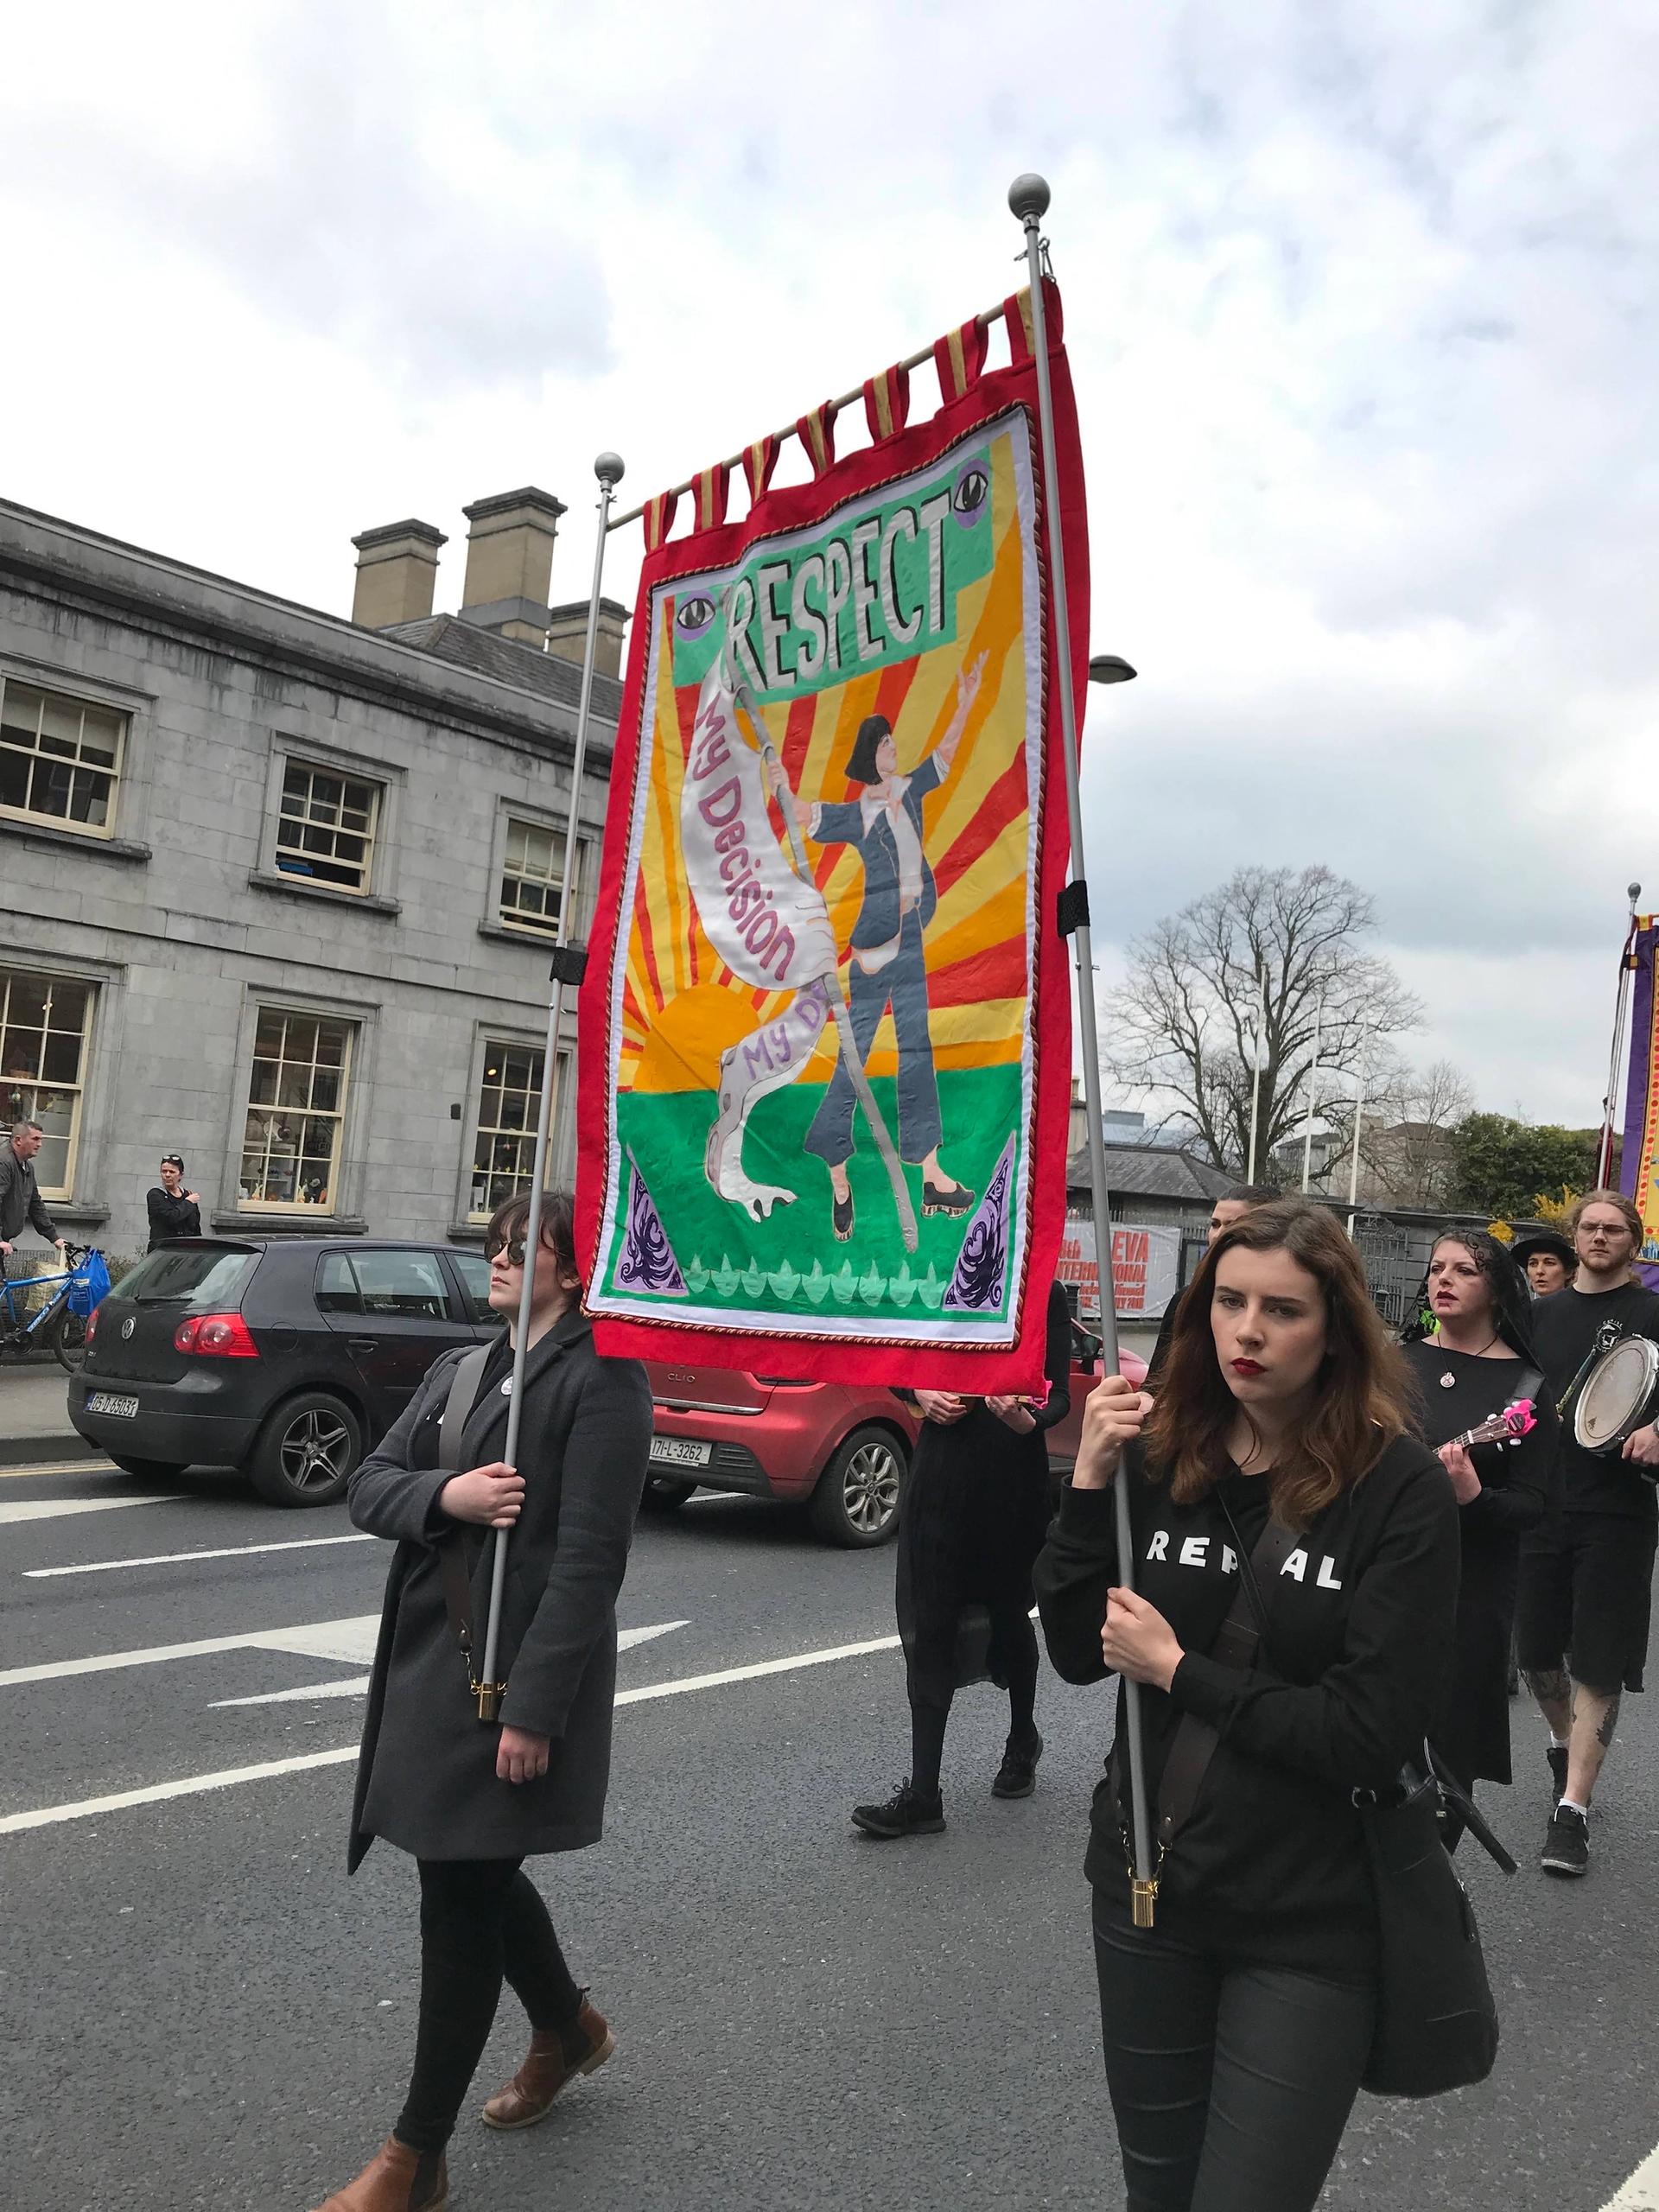 Artists’ Campaign to Repeal the Eighth Amendment march through the streets of Limerick Gareth Harris